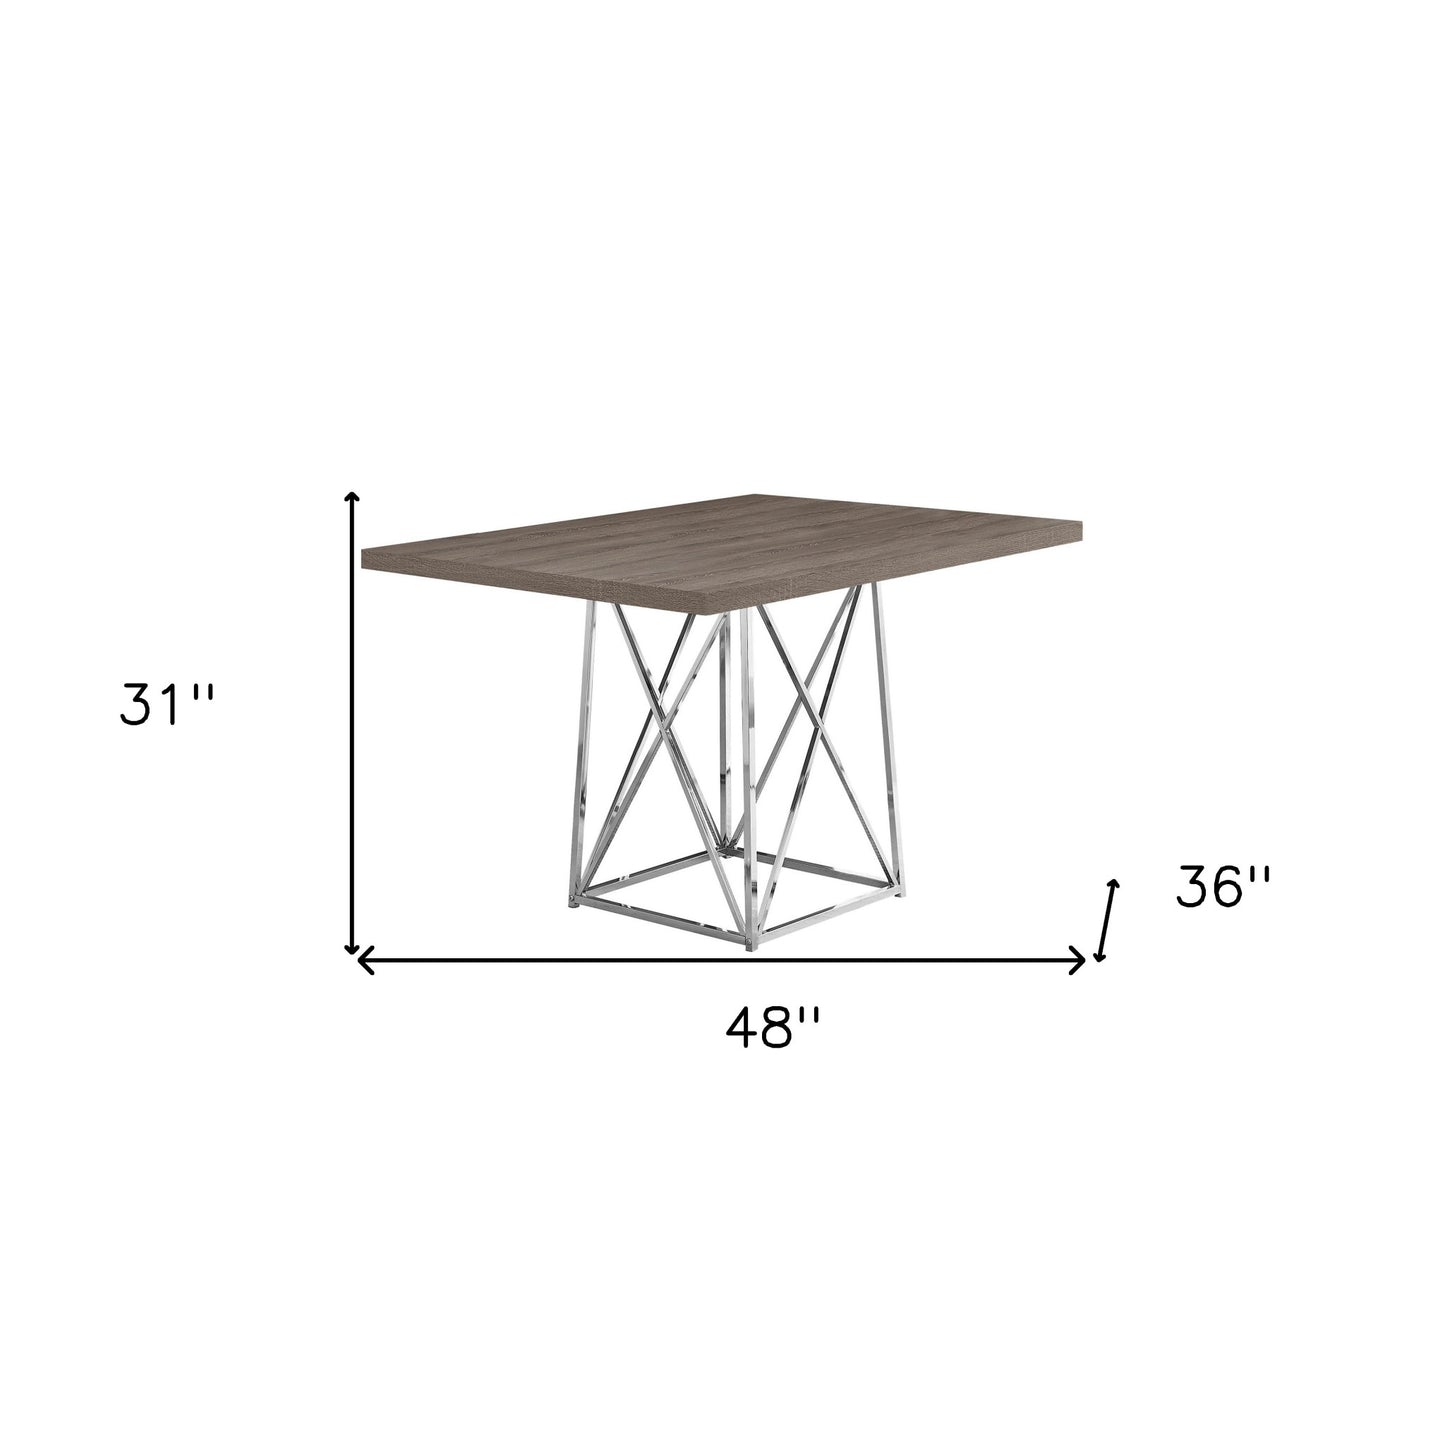 48" Taupe And Silver Metal Dining Table